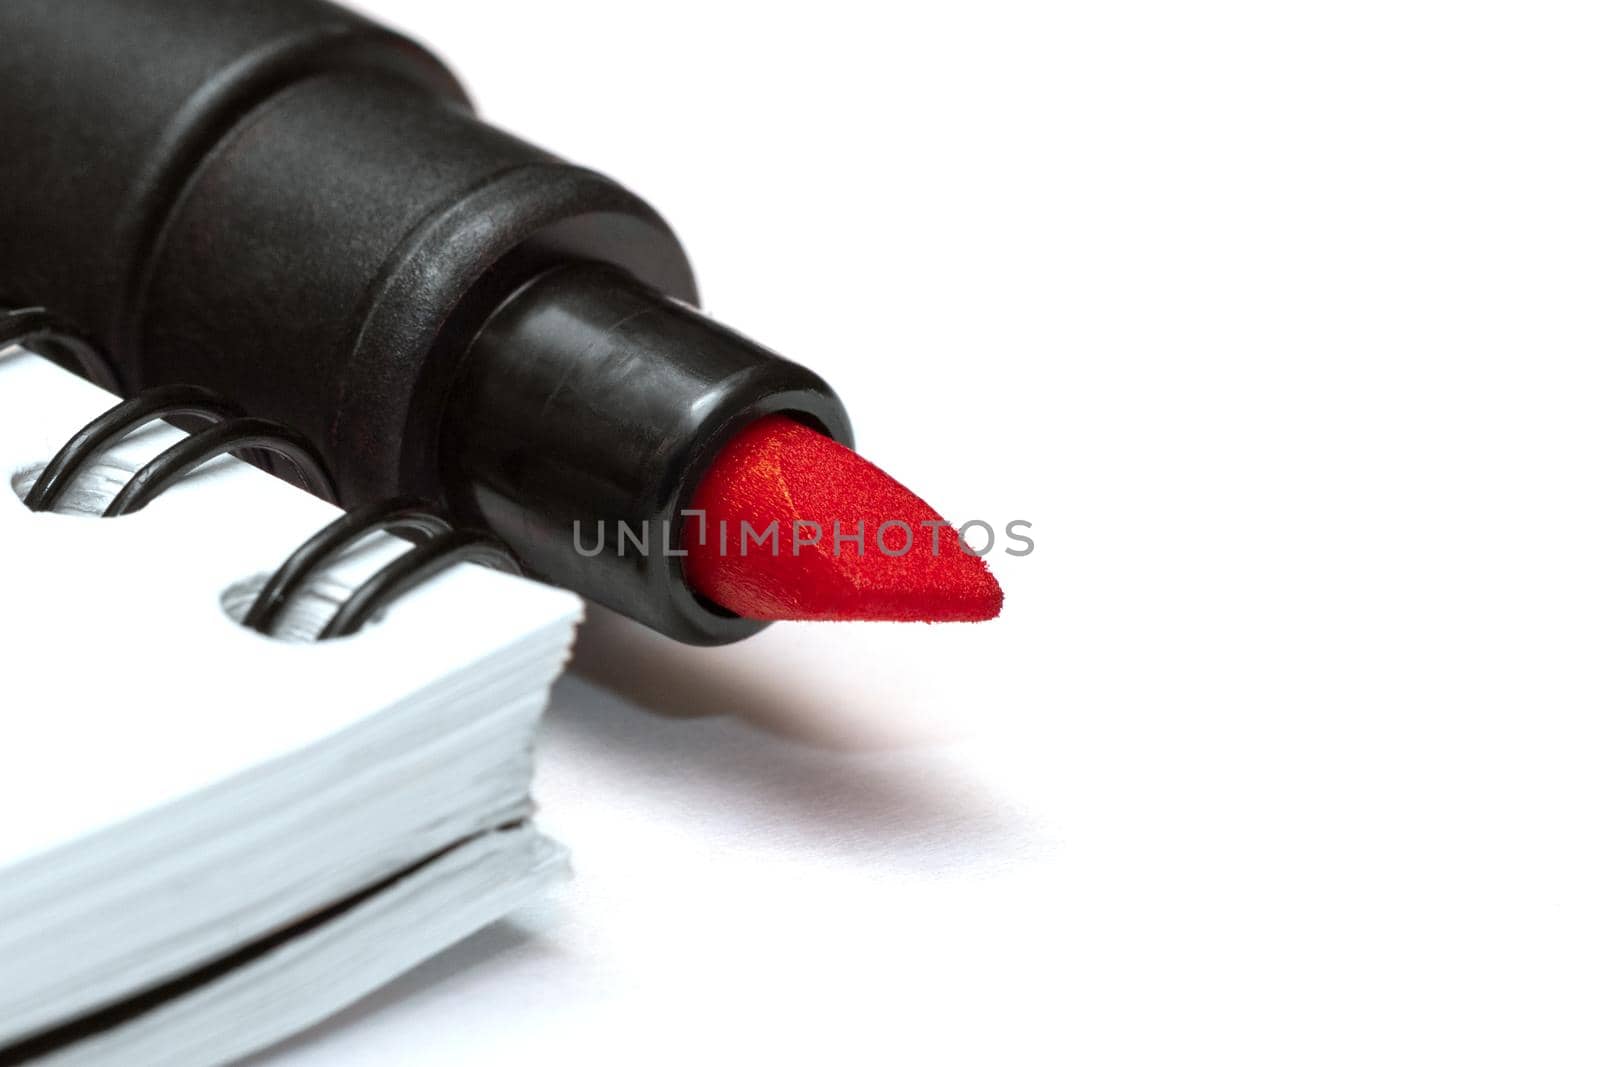 Red marker near a blank note book on white background. Close-up macro view